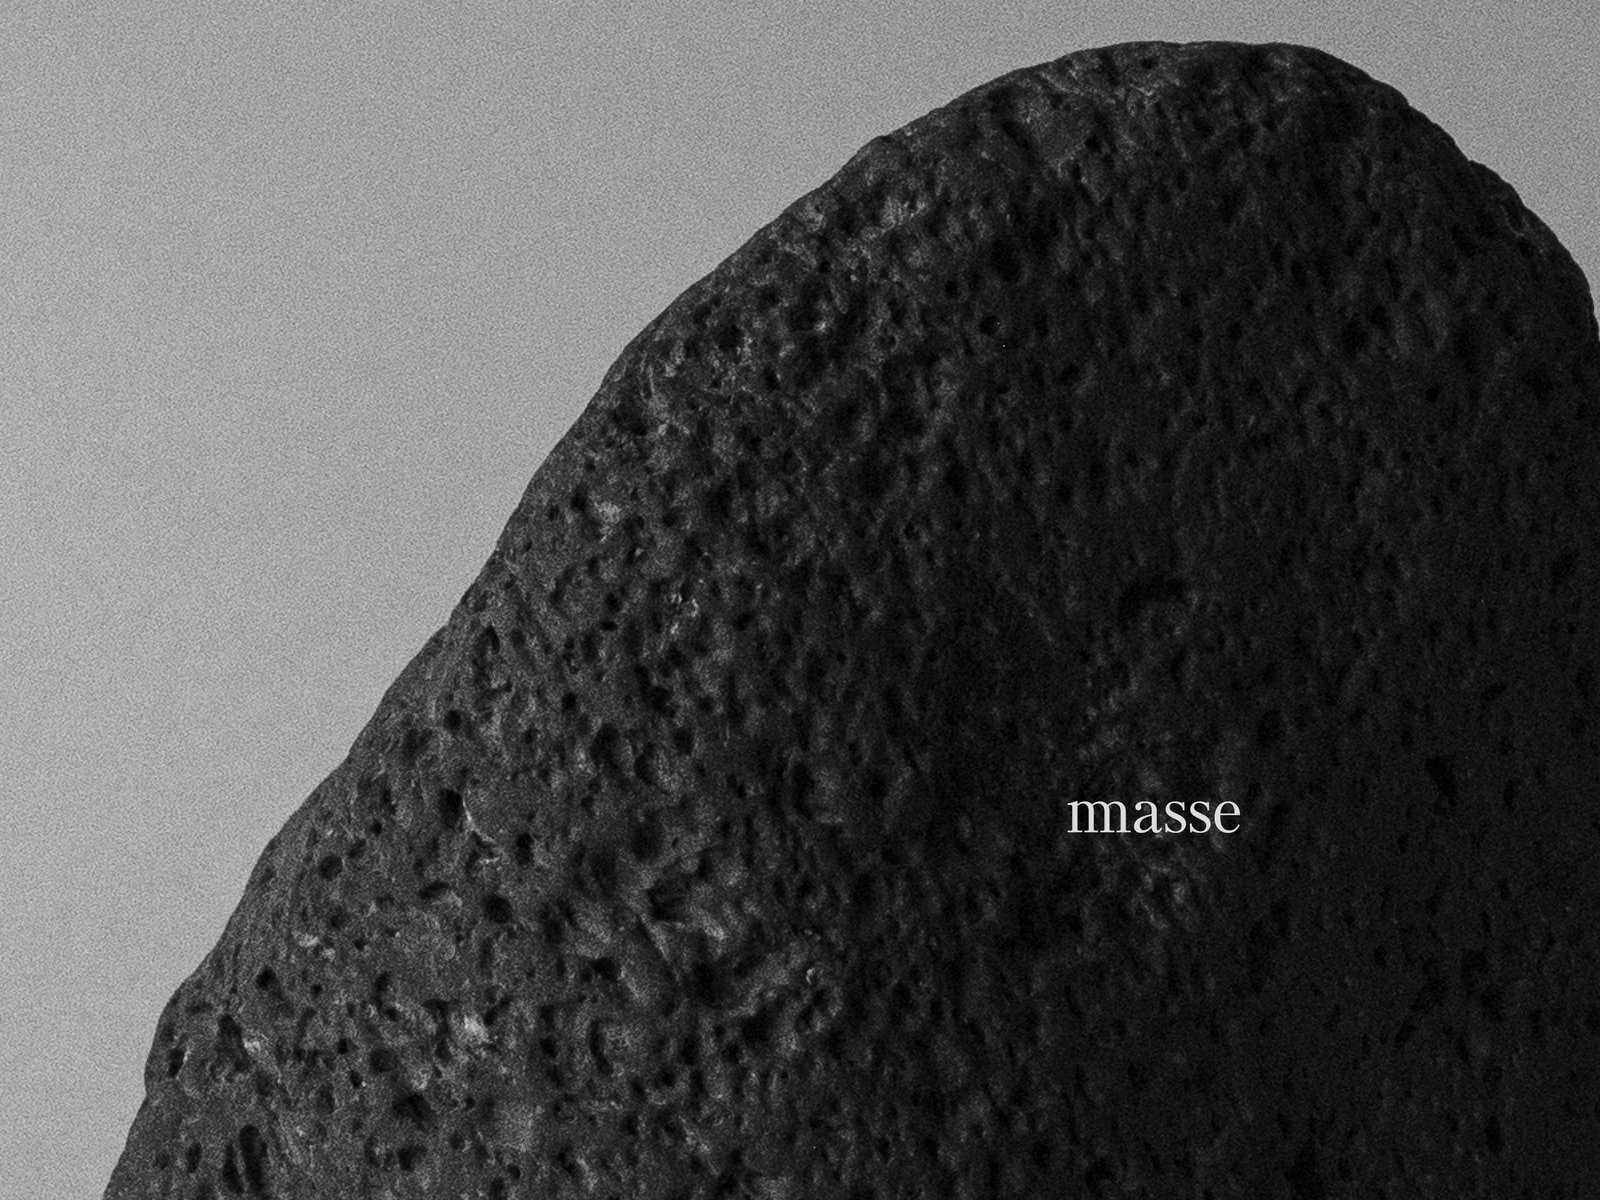 A greyscale close up of a porous black rock with a logotype that says "masse". The image is grainy and noisy, but minimalistic. by Sydney SG